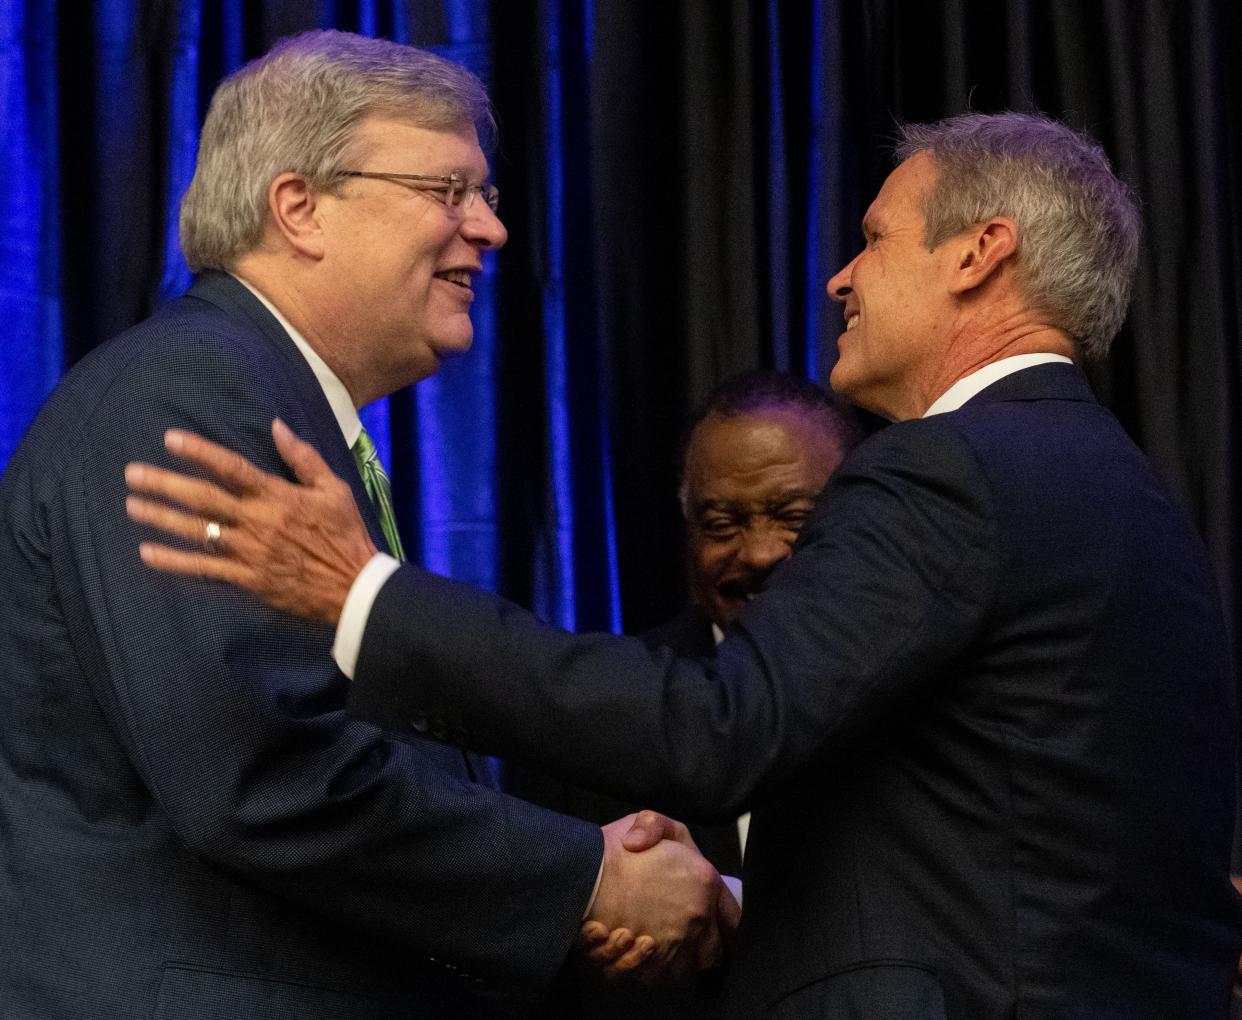 Tennessee Gov. Bill Lee shakes hands with Memphis Mayor Jim Strickland at the 2022 MMBC Continuum Economic Development Forum on Wednesday, Aug. 24, 2022, at the Renasant Convention Center in Memphis.